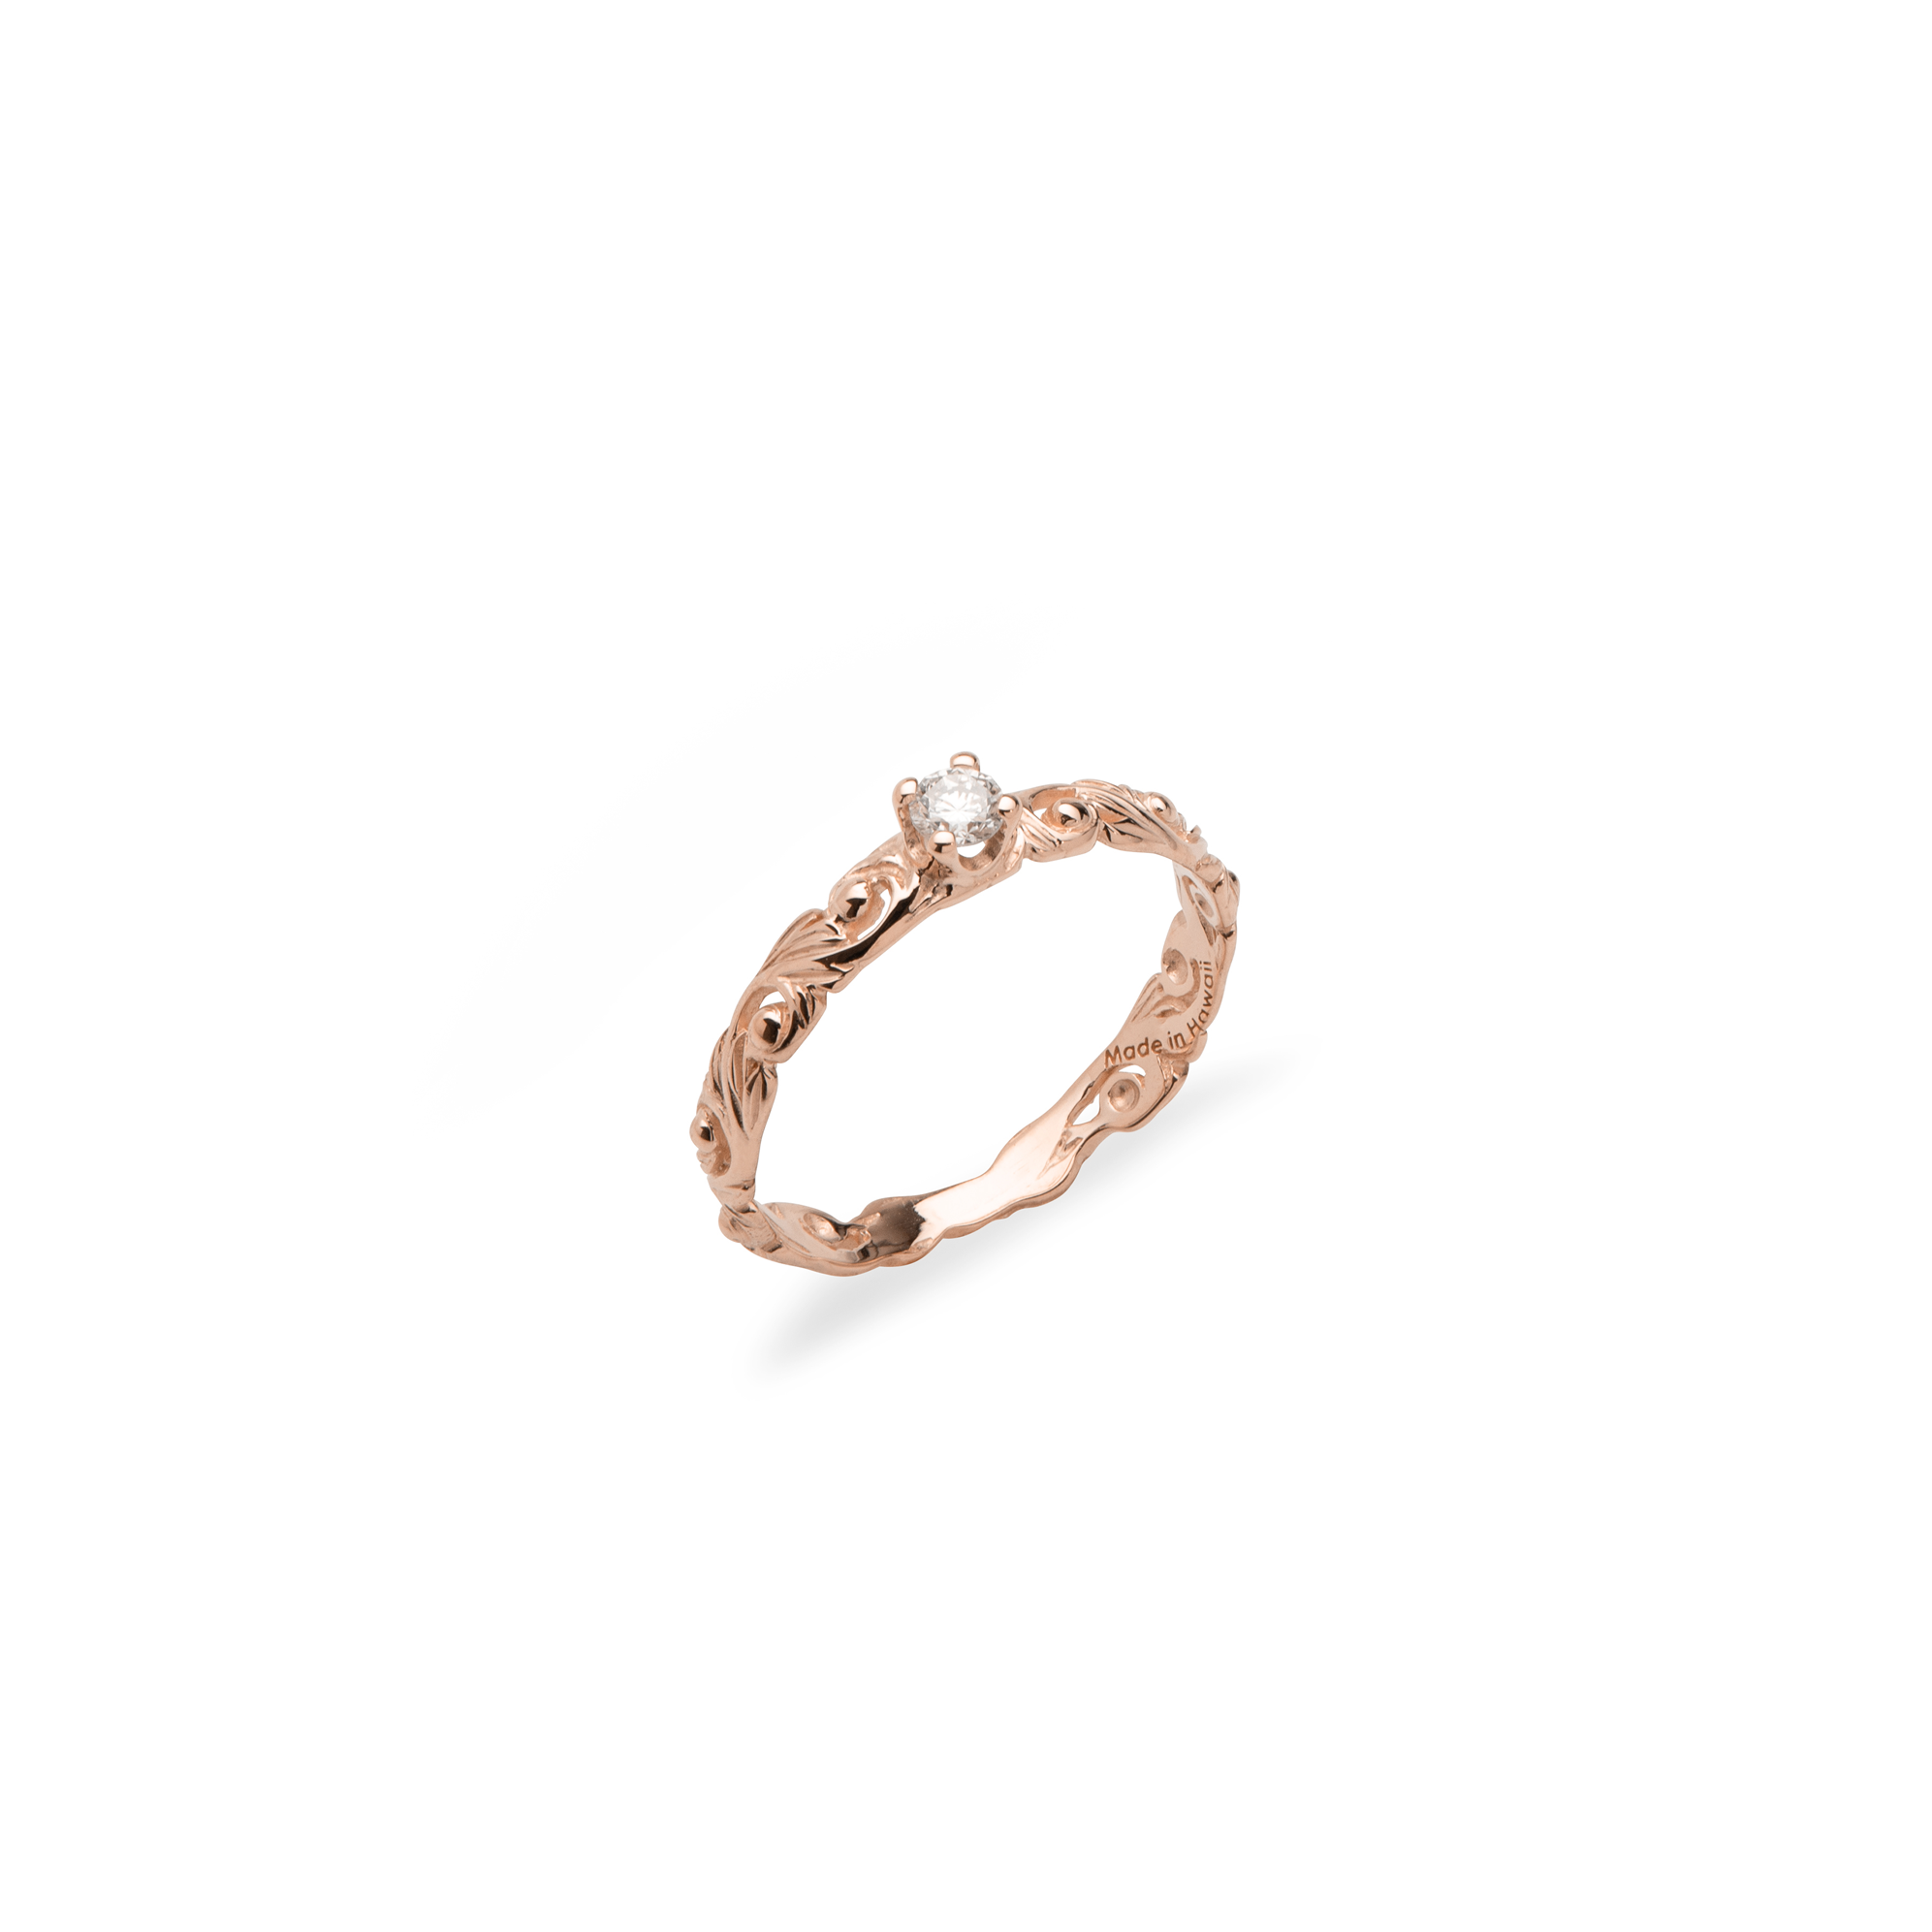 Living Heirloom Ring in Rose Gold with Diamonds - 3mm